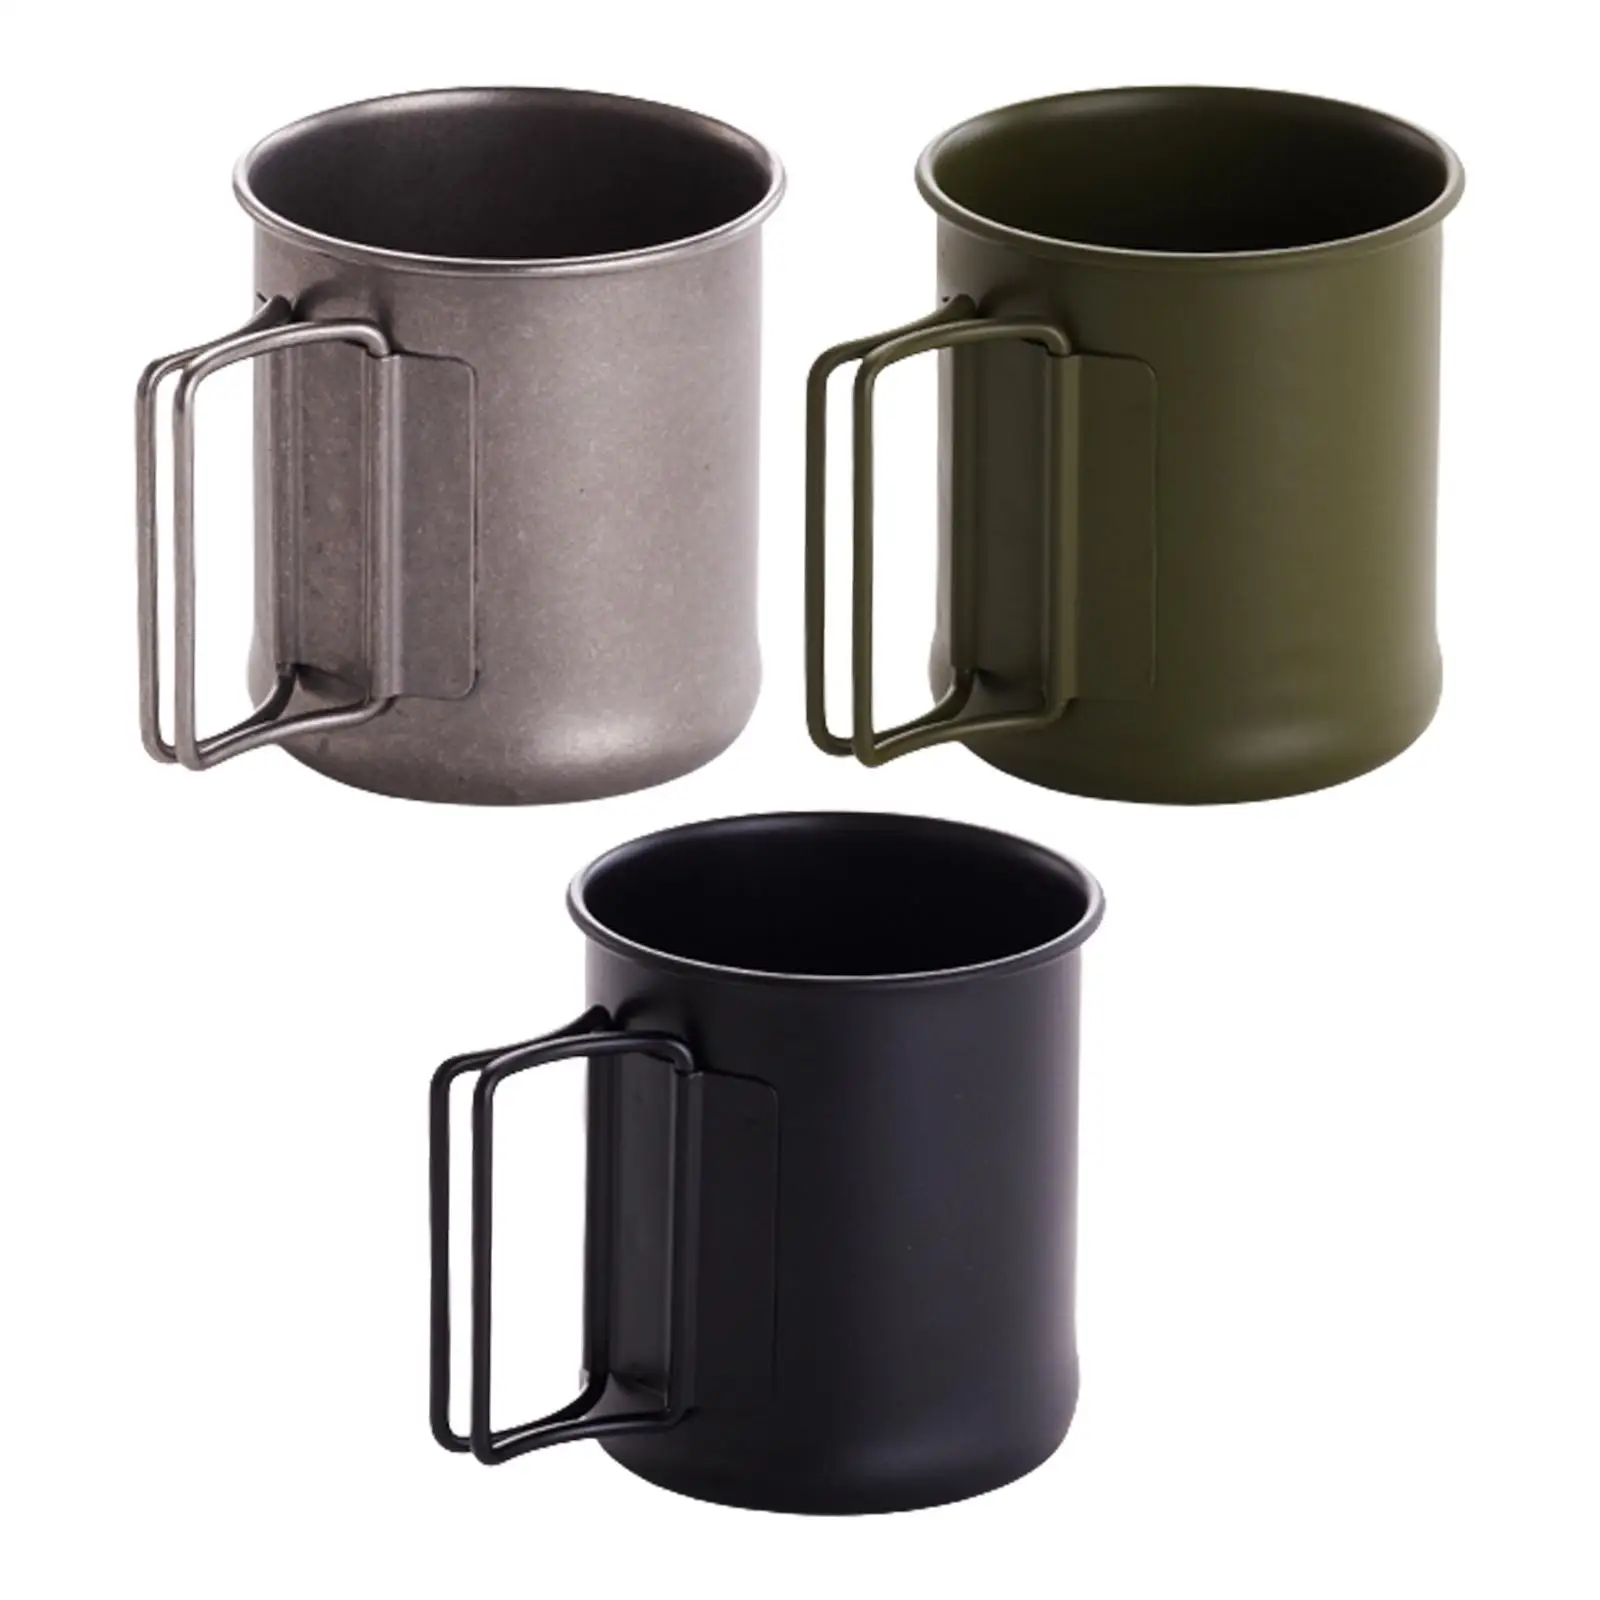 Stainless Steel Camping Mug, 1ml Water Cup with Foldable Handles for Outdoor